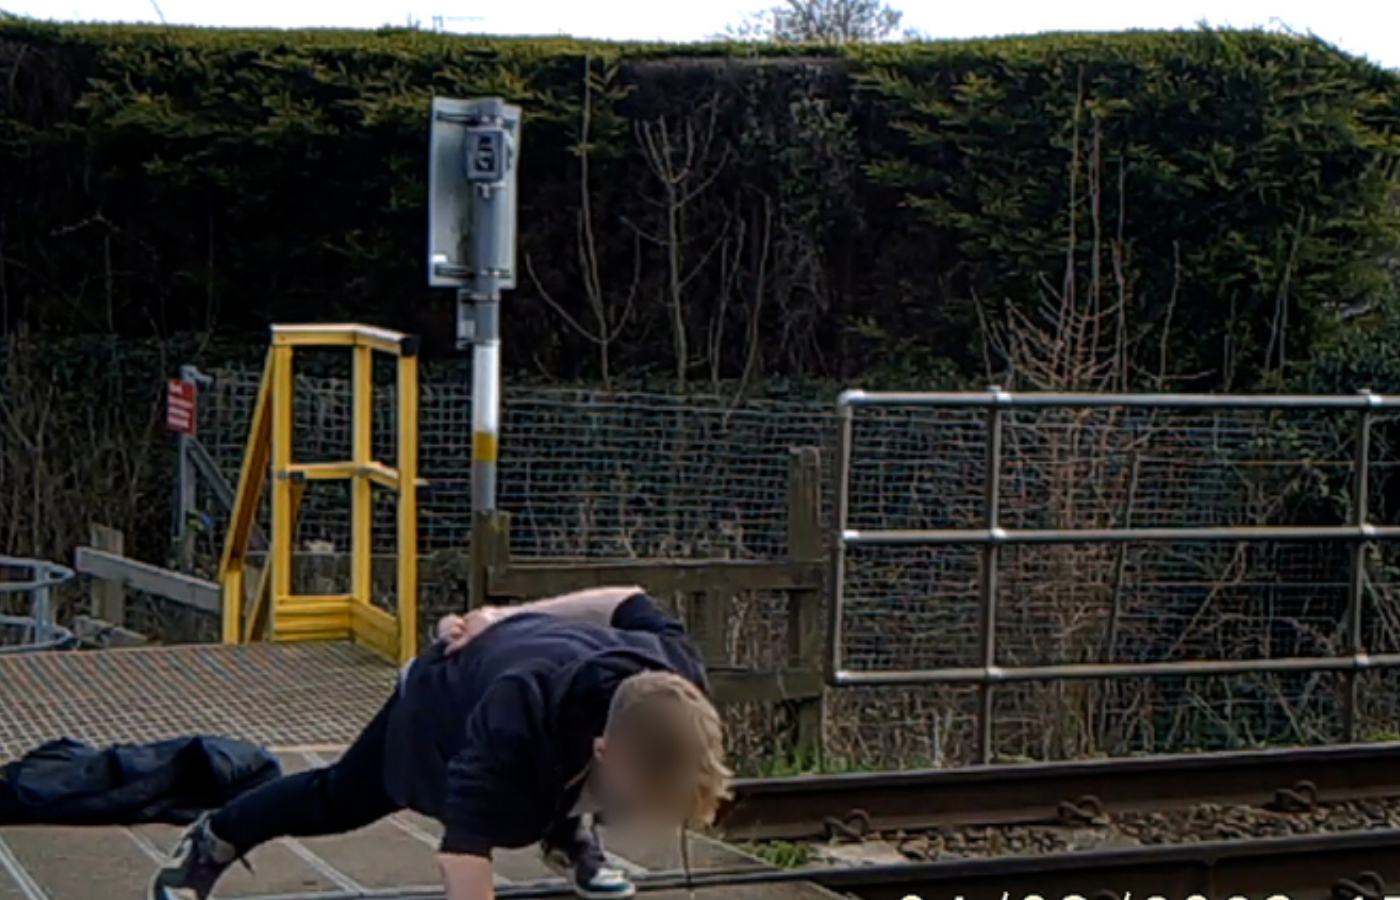 One clip shows a male doing push ups on the tracks. 